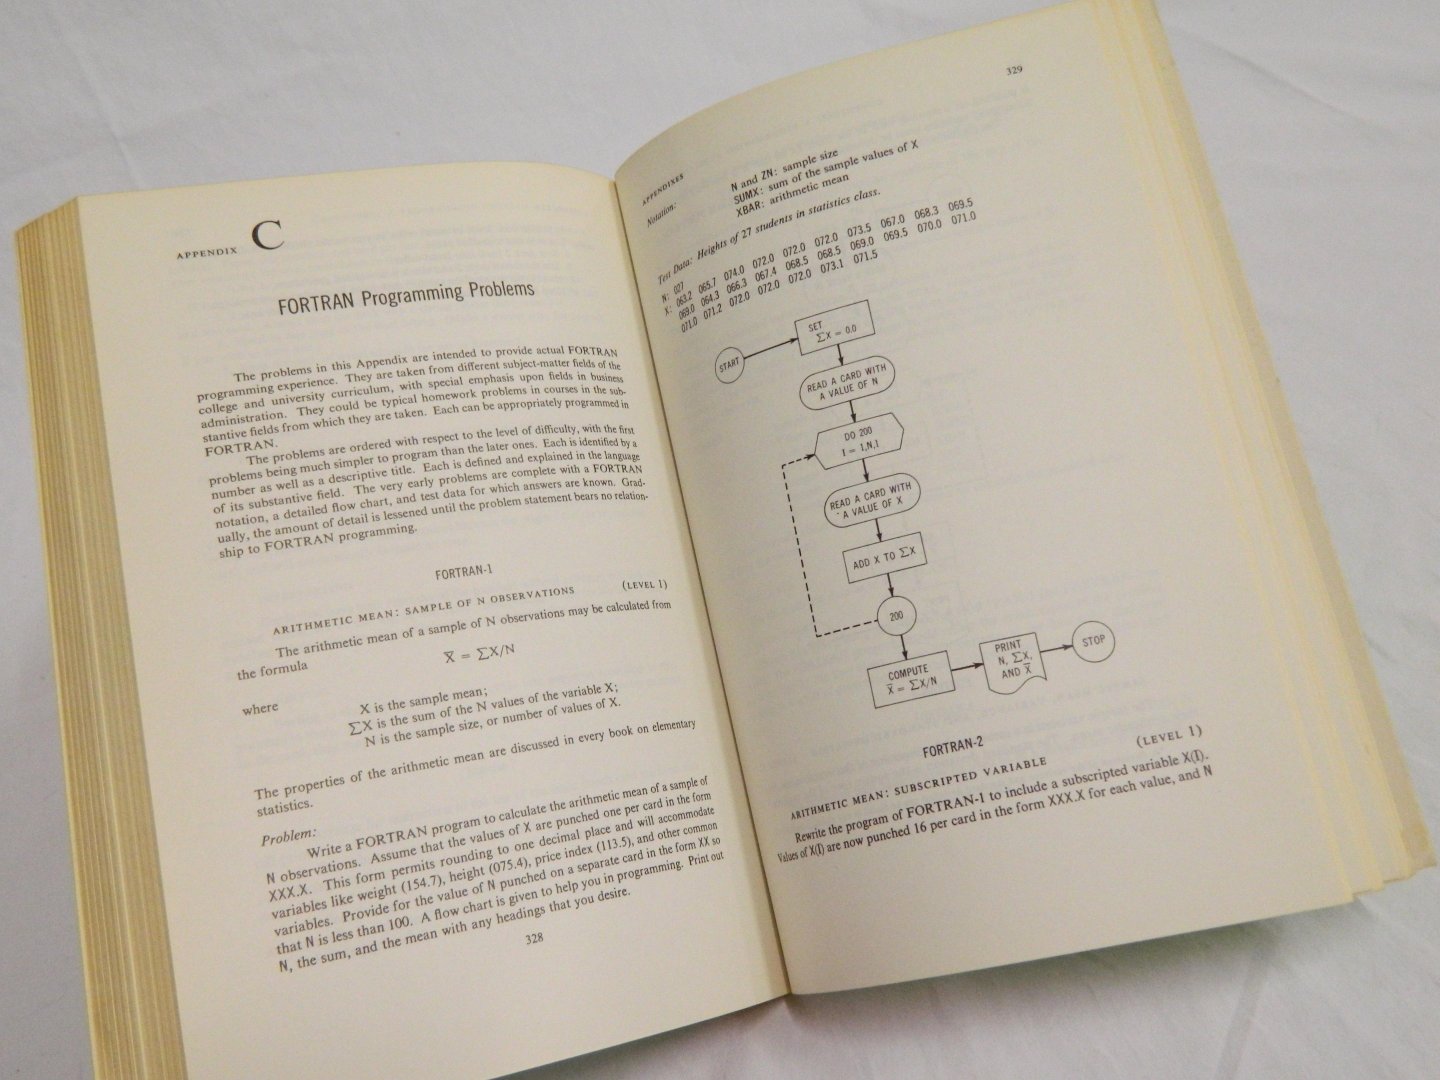 Clay Sprowls, R. - Zeldzaam - Computers, a programming problem approach, revised edition